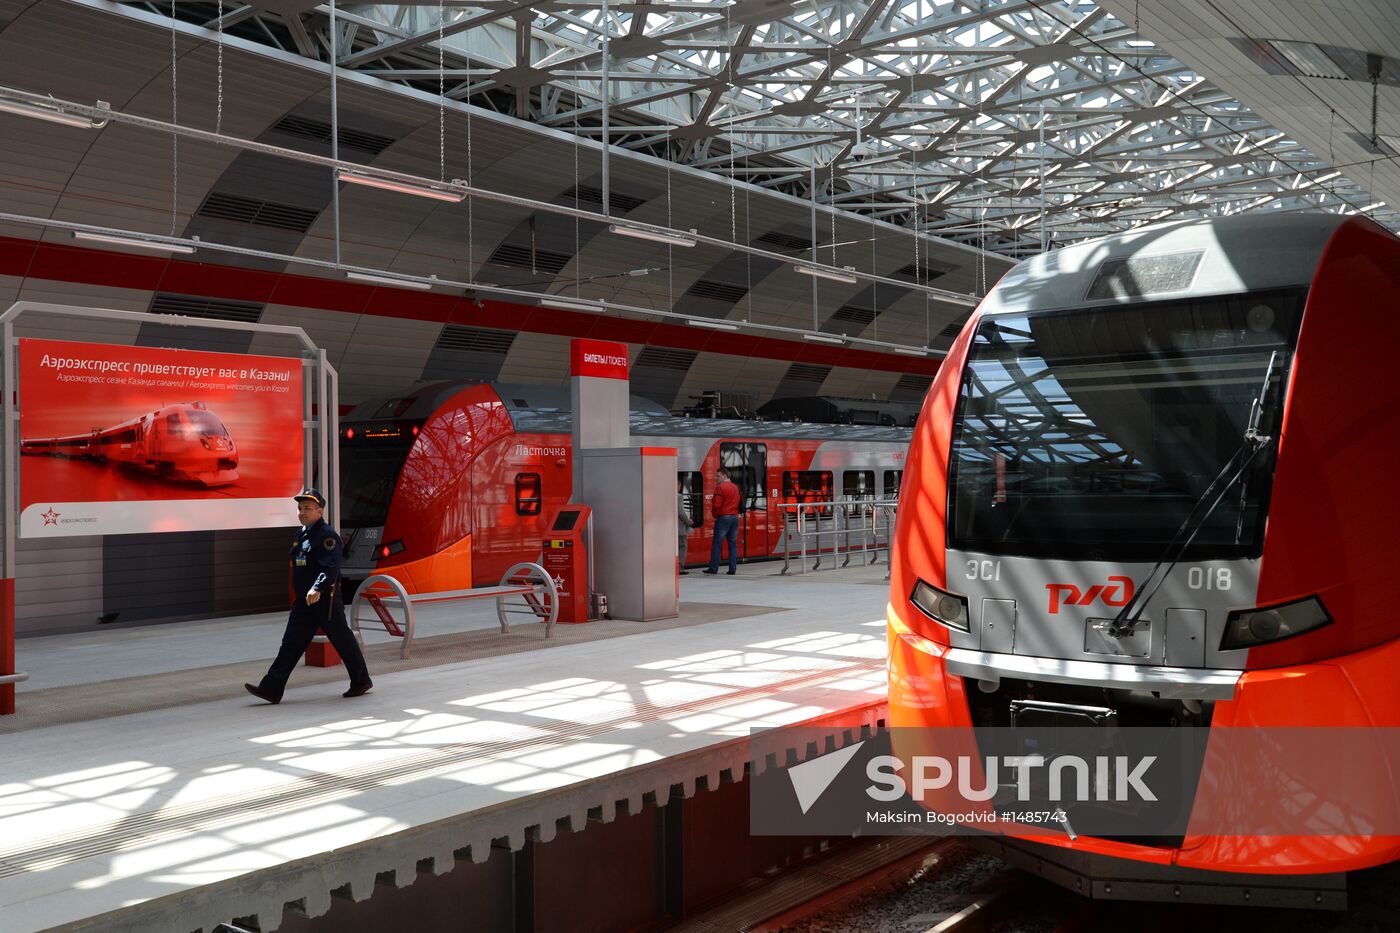 Lastochka high-speed express trains launched in Kazan